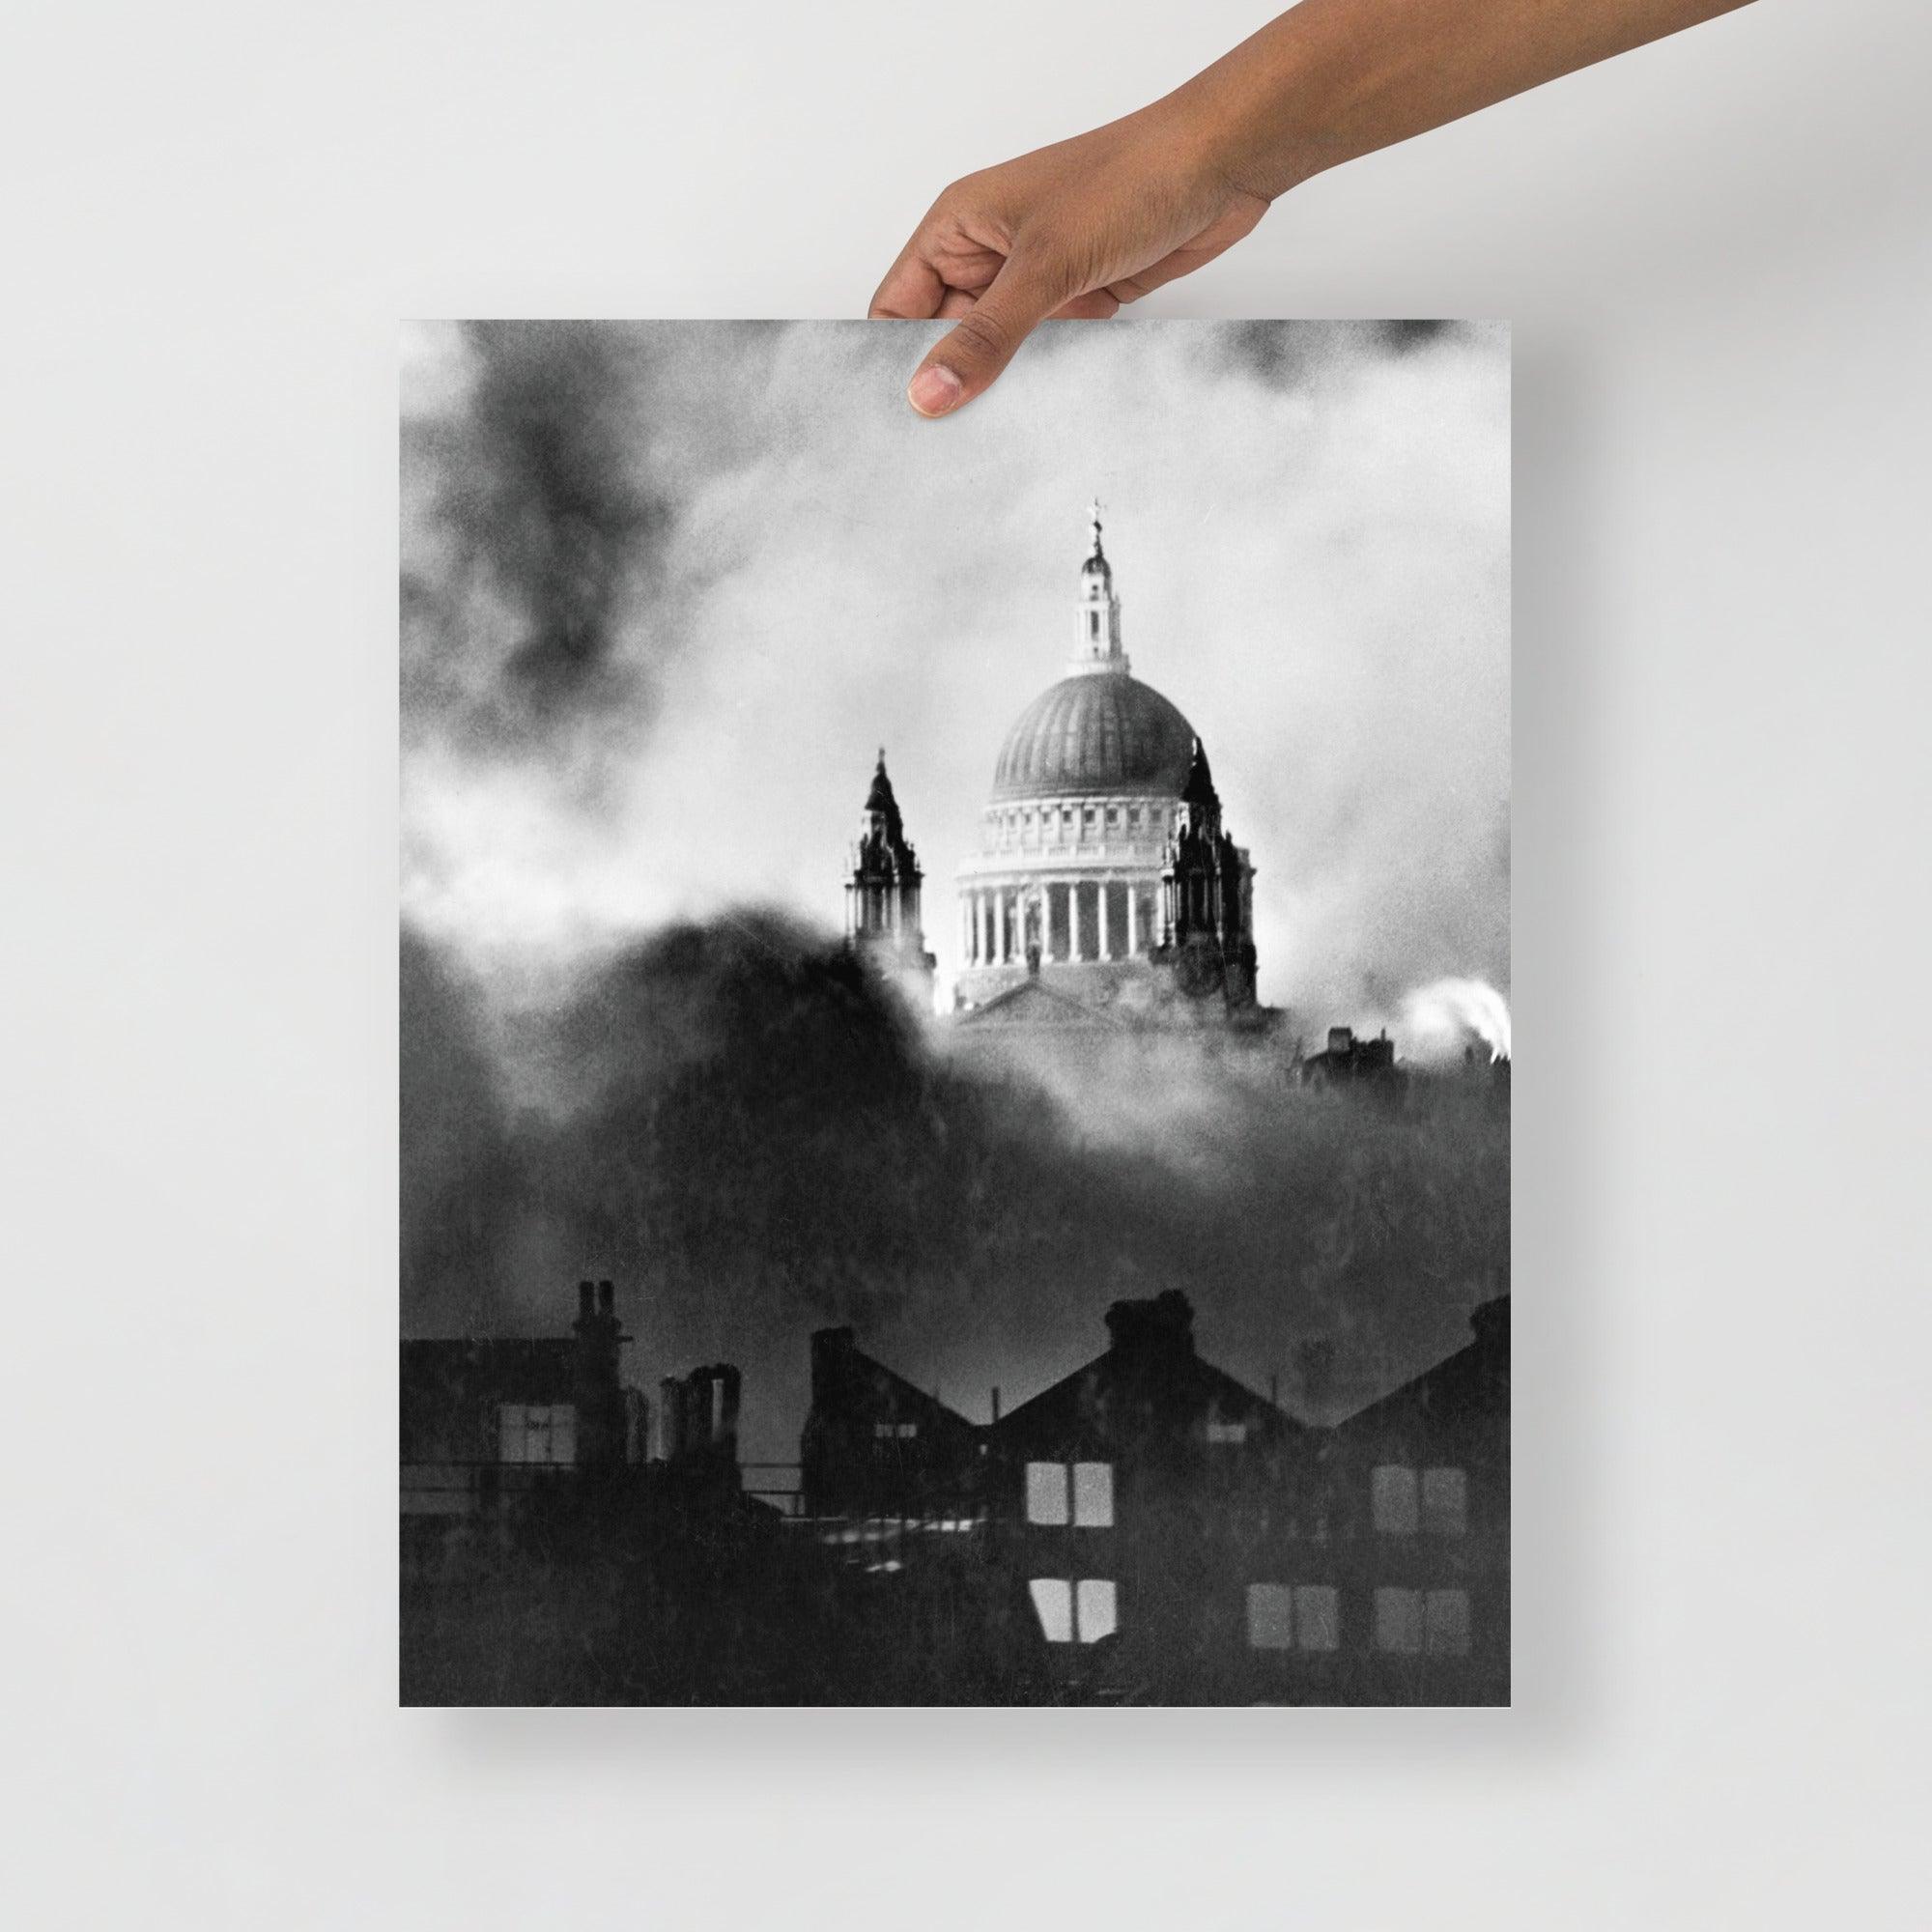 A St Paul's Survives poster on a plain backdrop in size 16x20”.